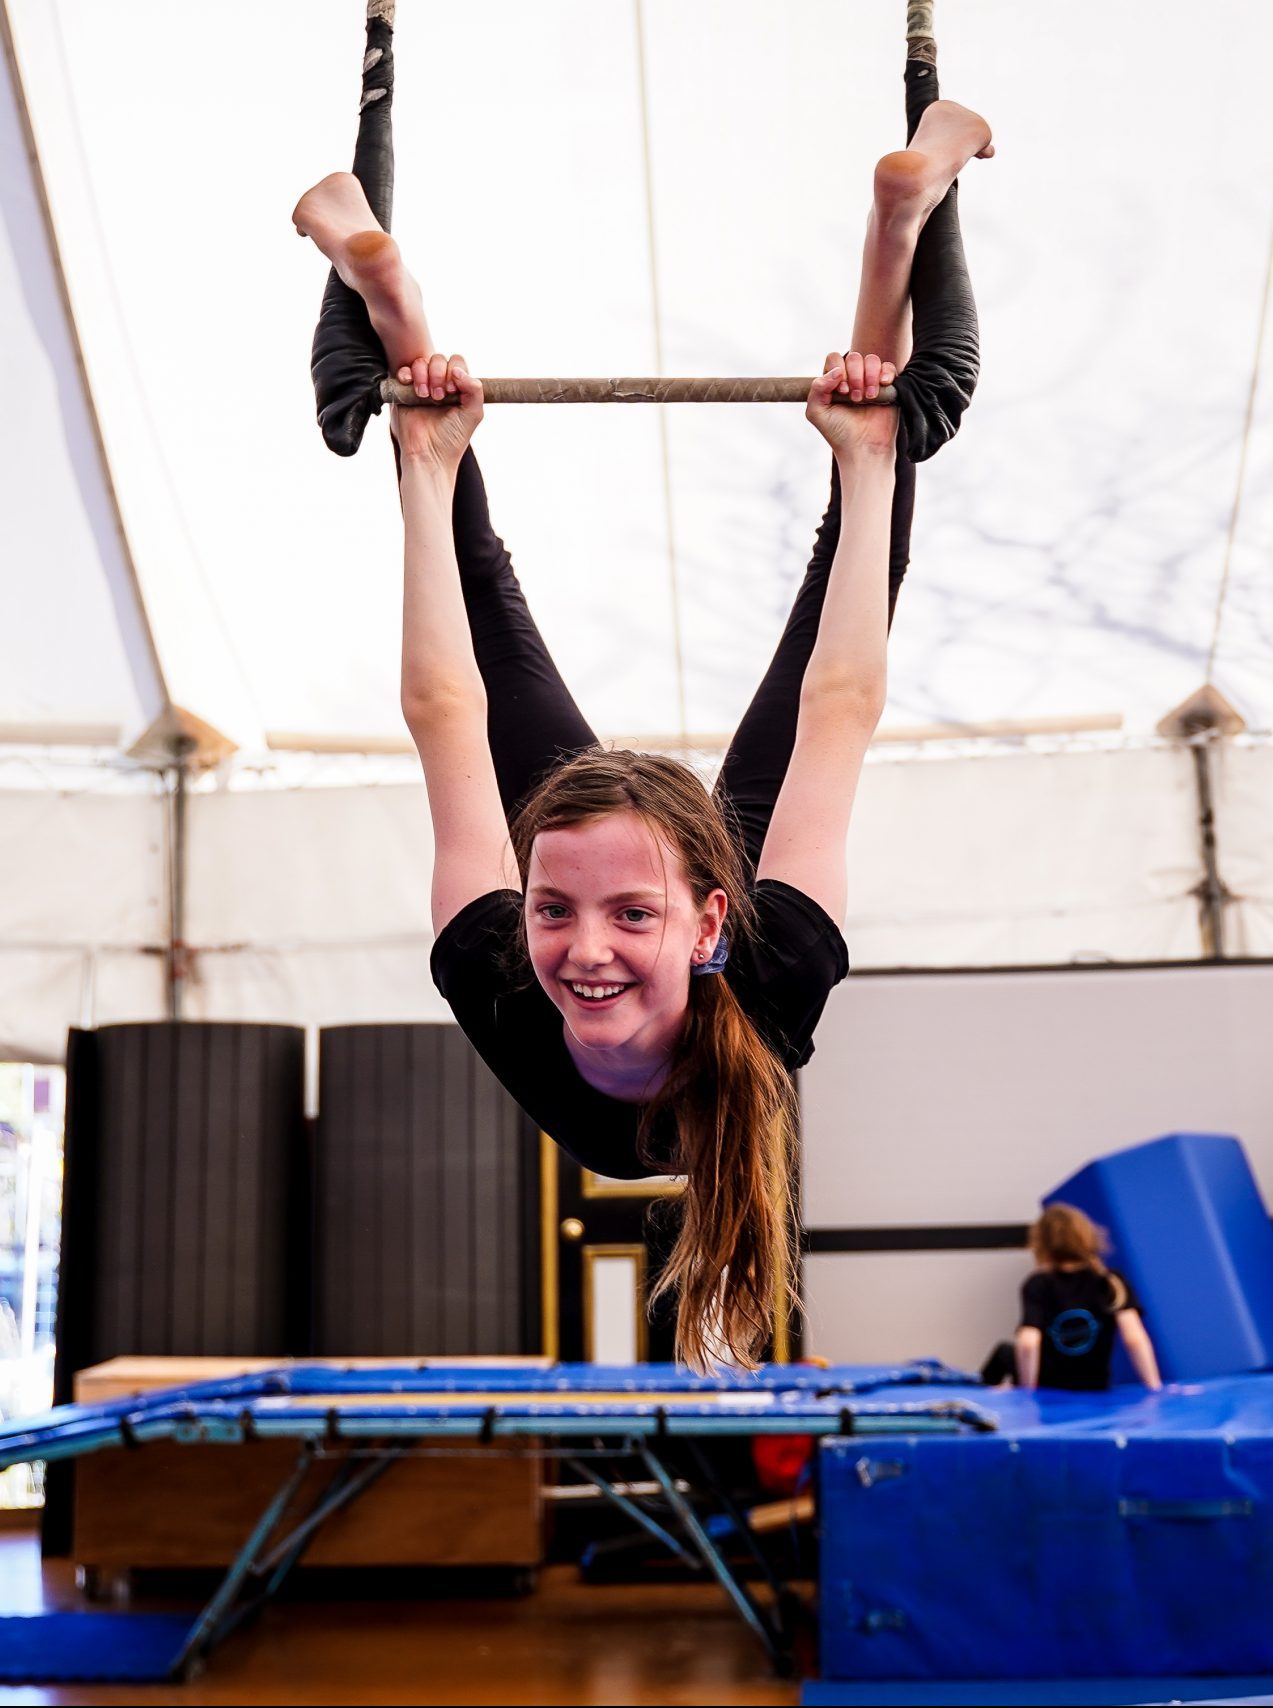 A girl hangs upside down from a trapeze